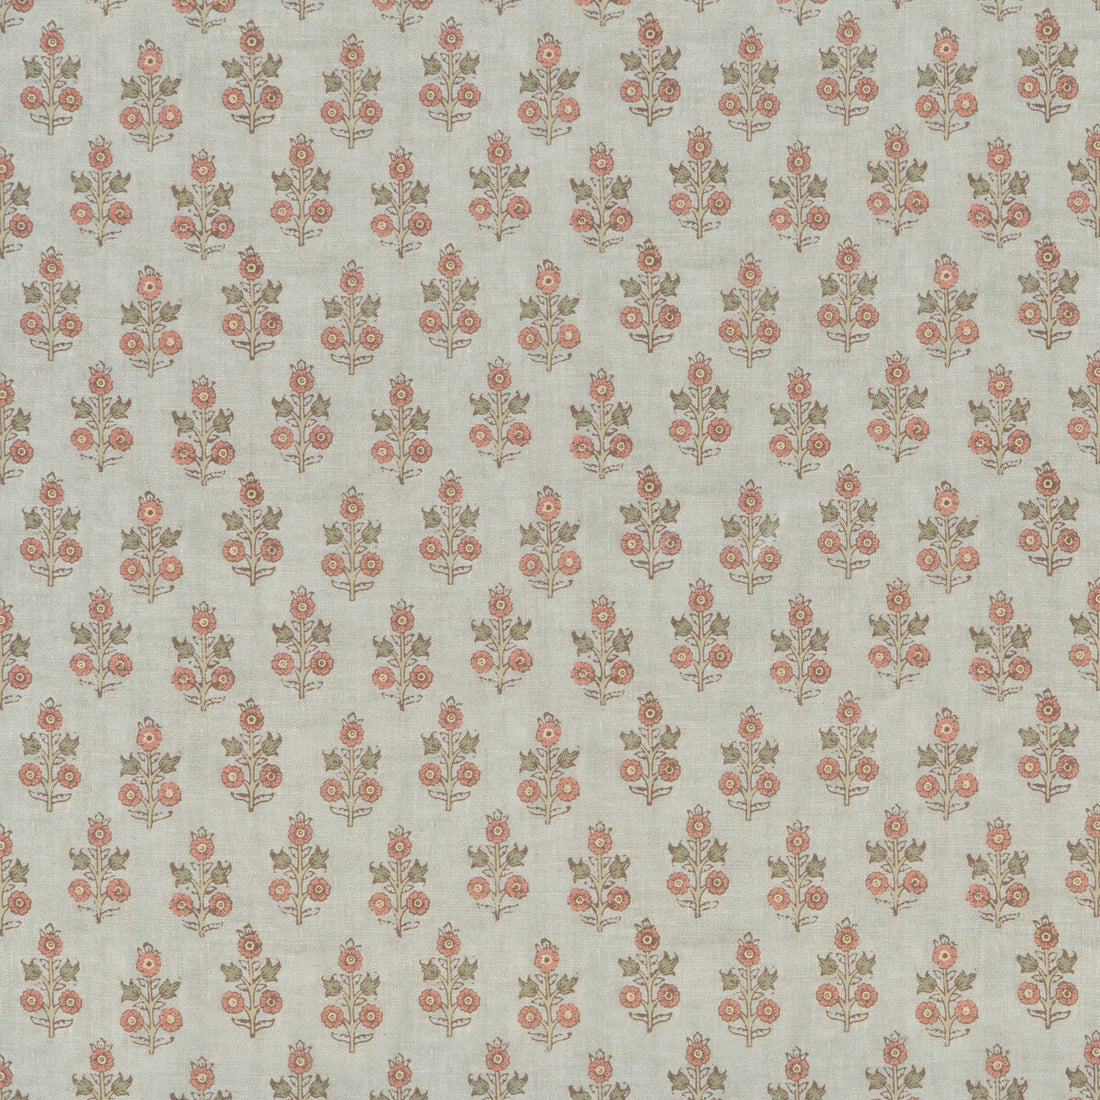 Poppy Sprig fabric in aqua/blush color - pattern BP11003.7.0 - by G P &amp; J Baker in the House Small Prints collection